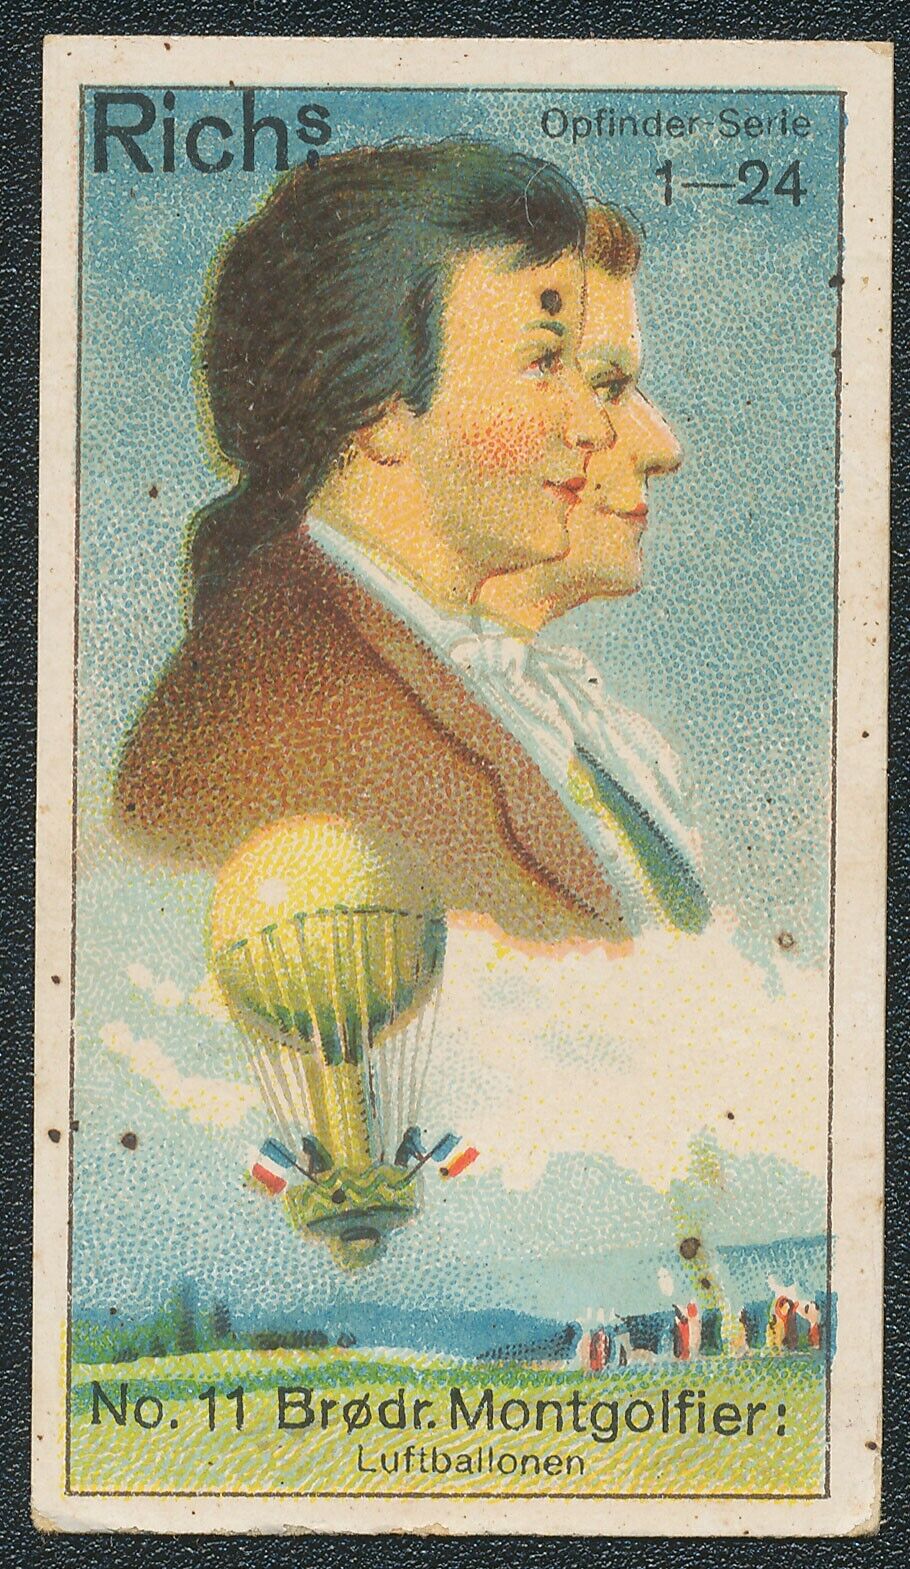 1927 RICH\'S COFFEE MONTGOLFIER BROTHERS INVENTOR BALLOONS OPFINDER CARD #11